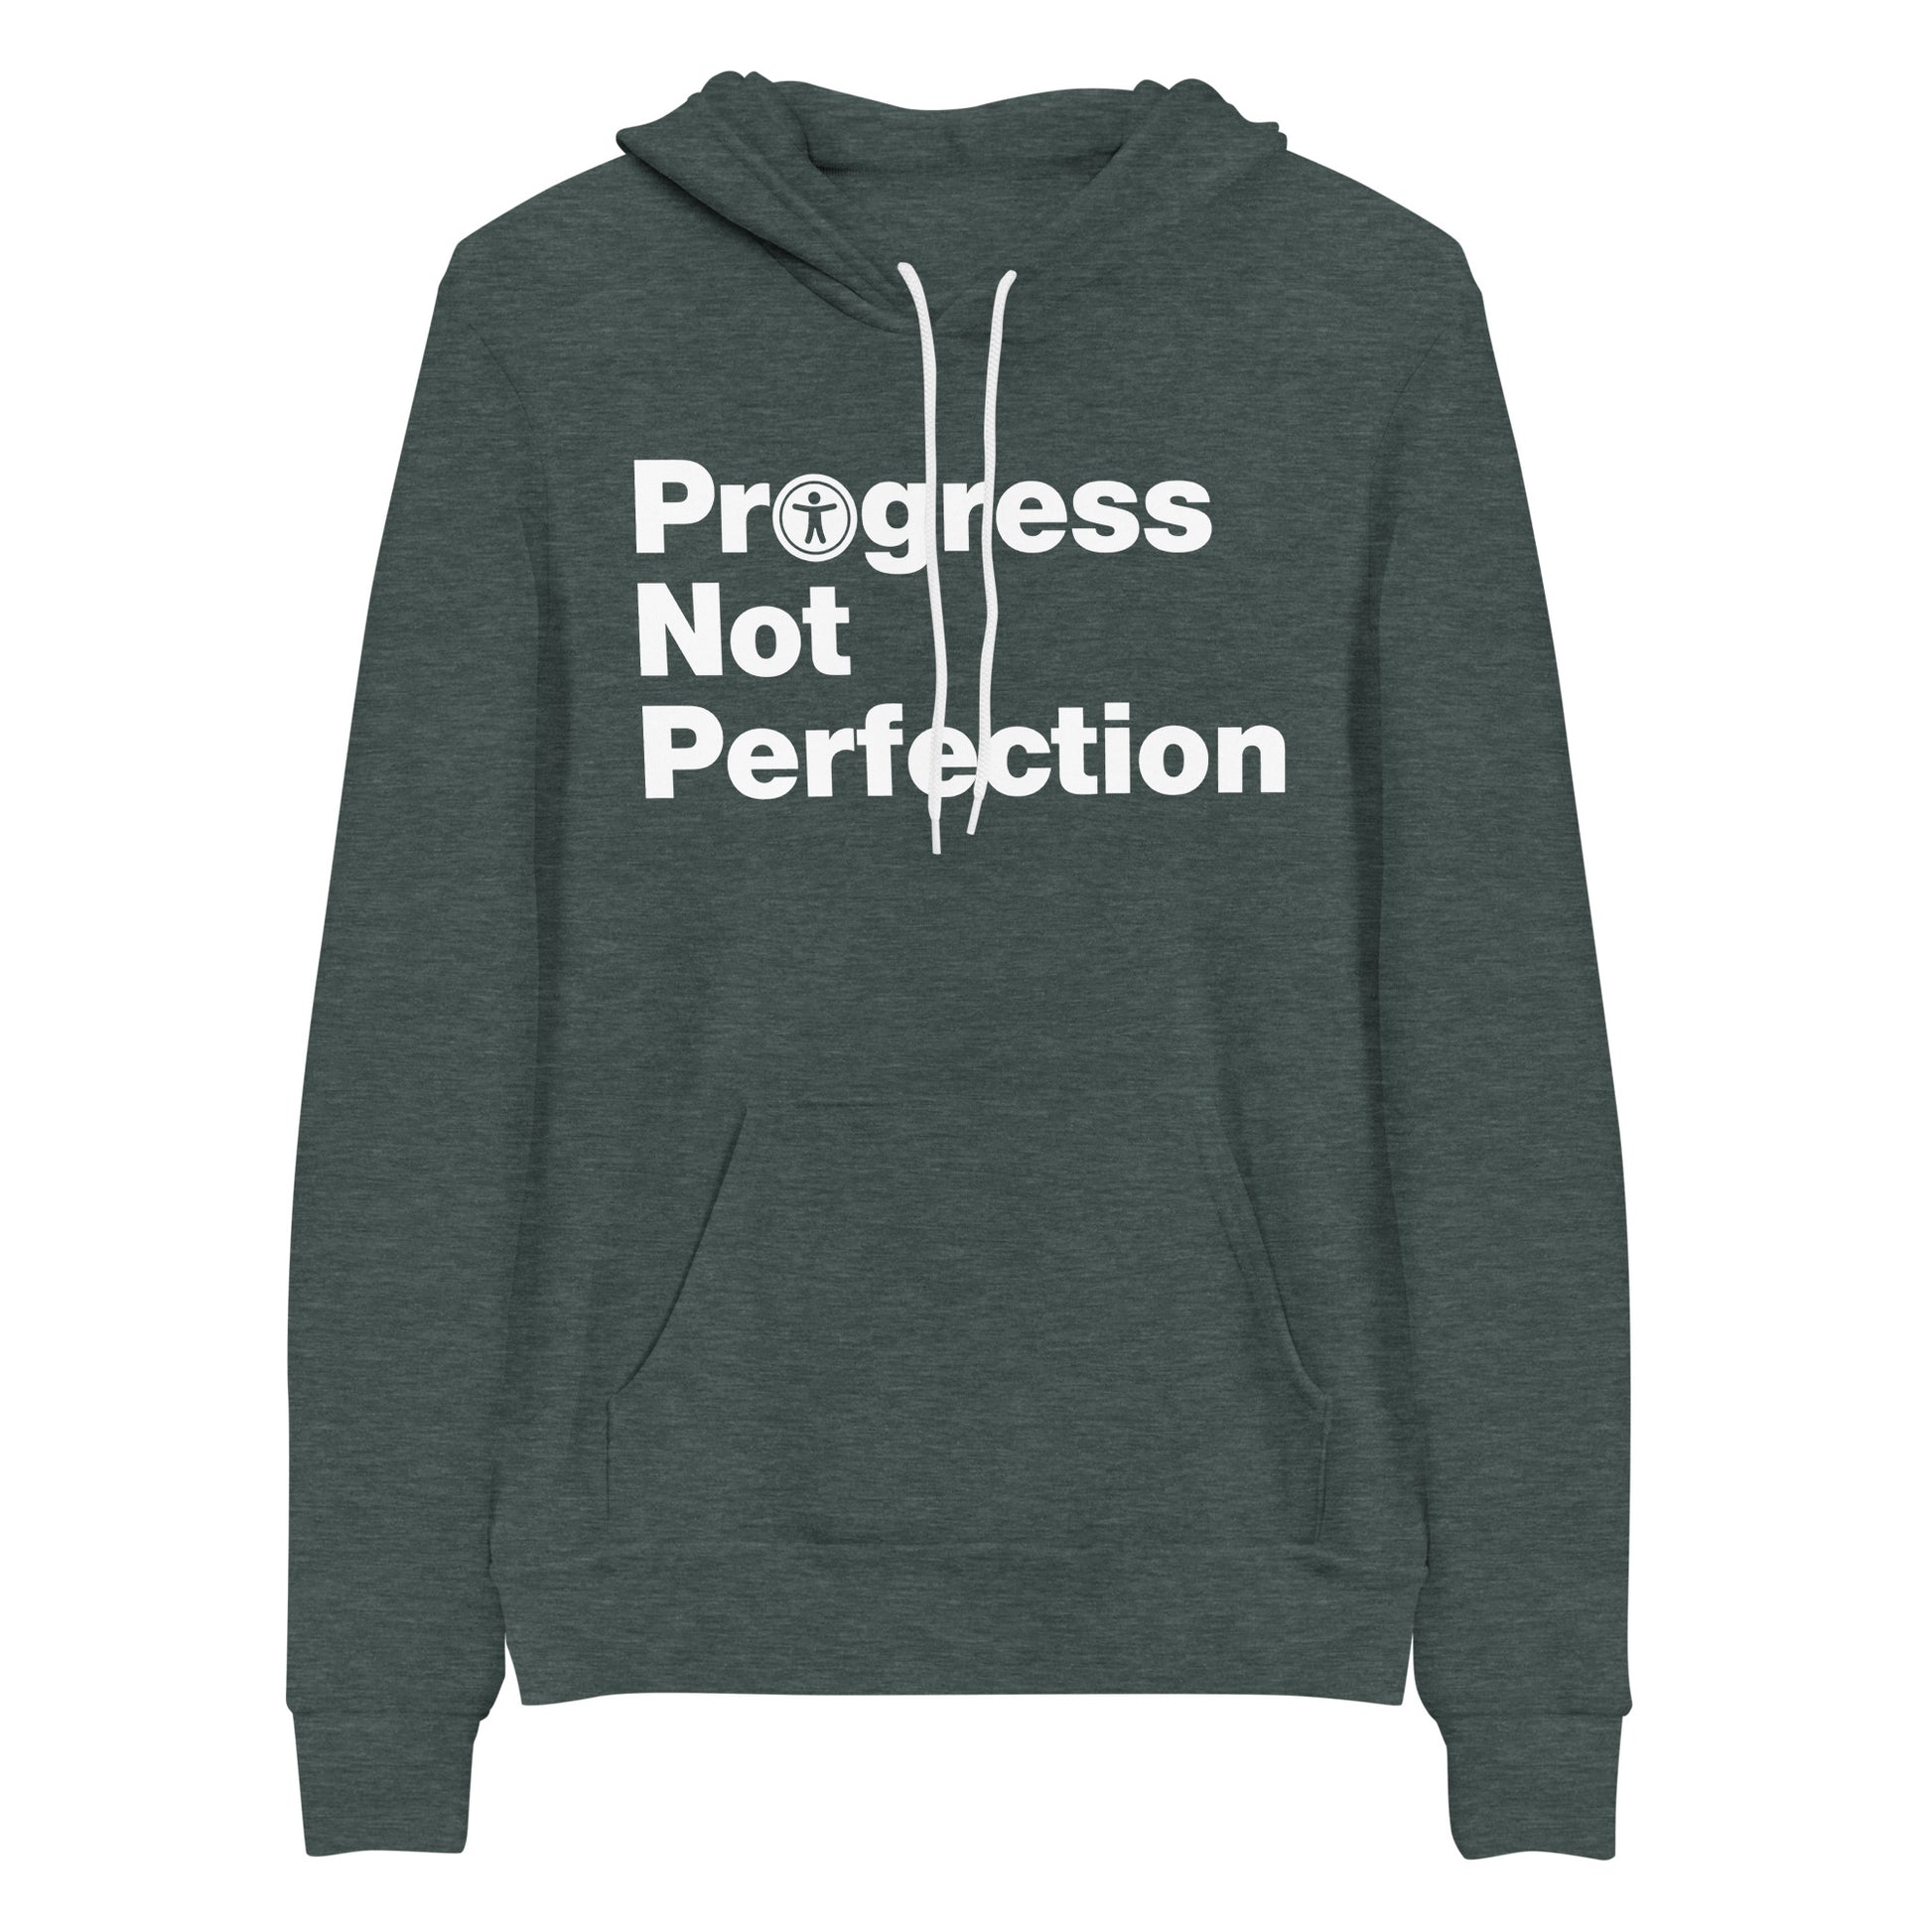 White, Progress Not Perfection, words, stacked, left aligned. 'O' in Progress is round universal icon, on front of heather dark green hooded sweter.